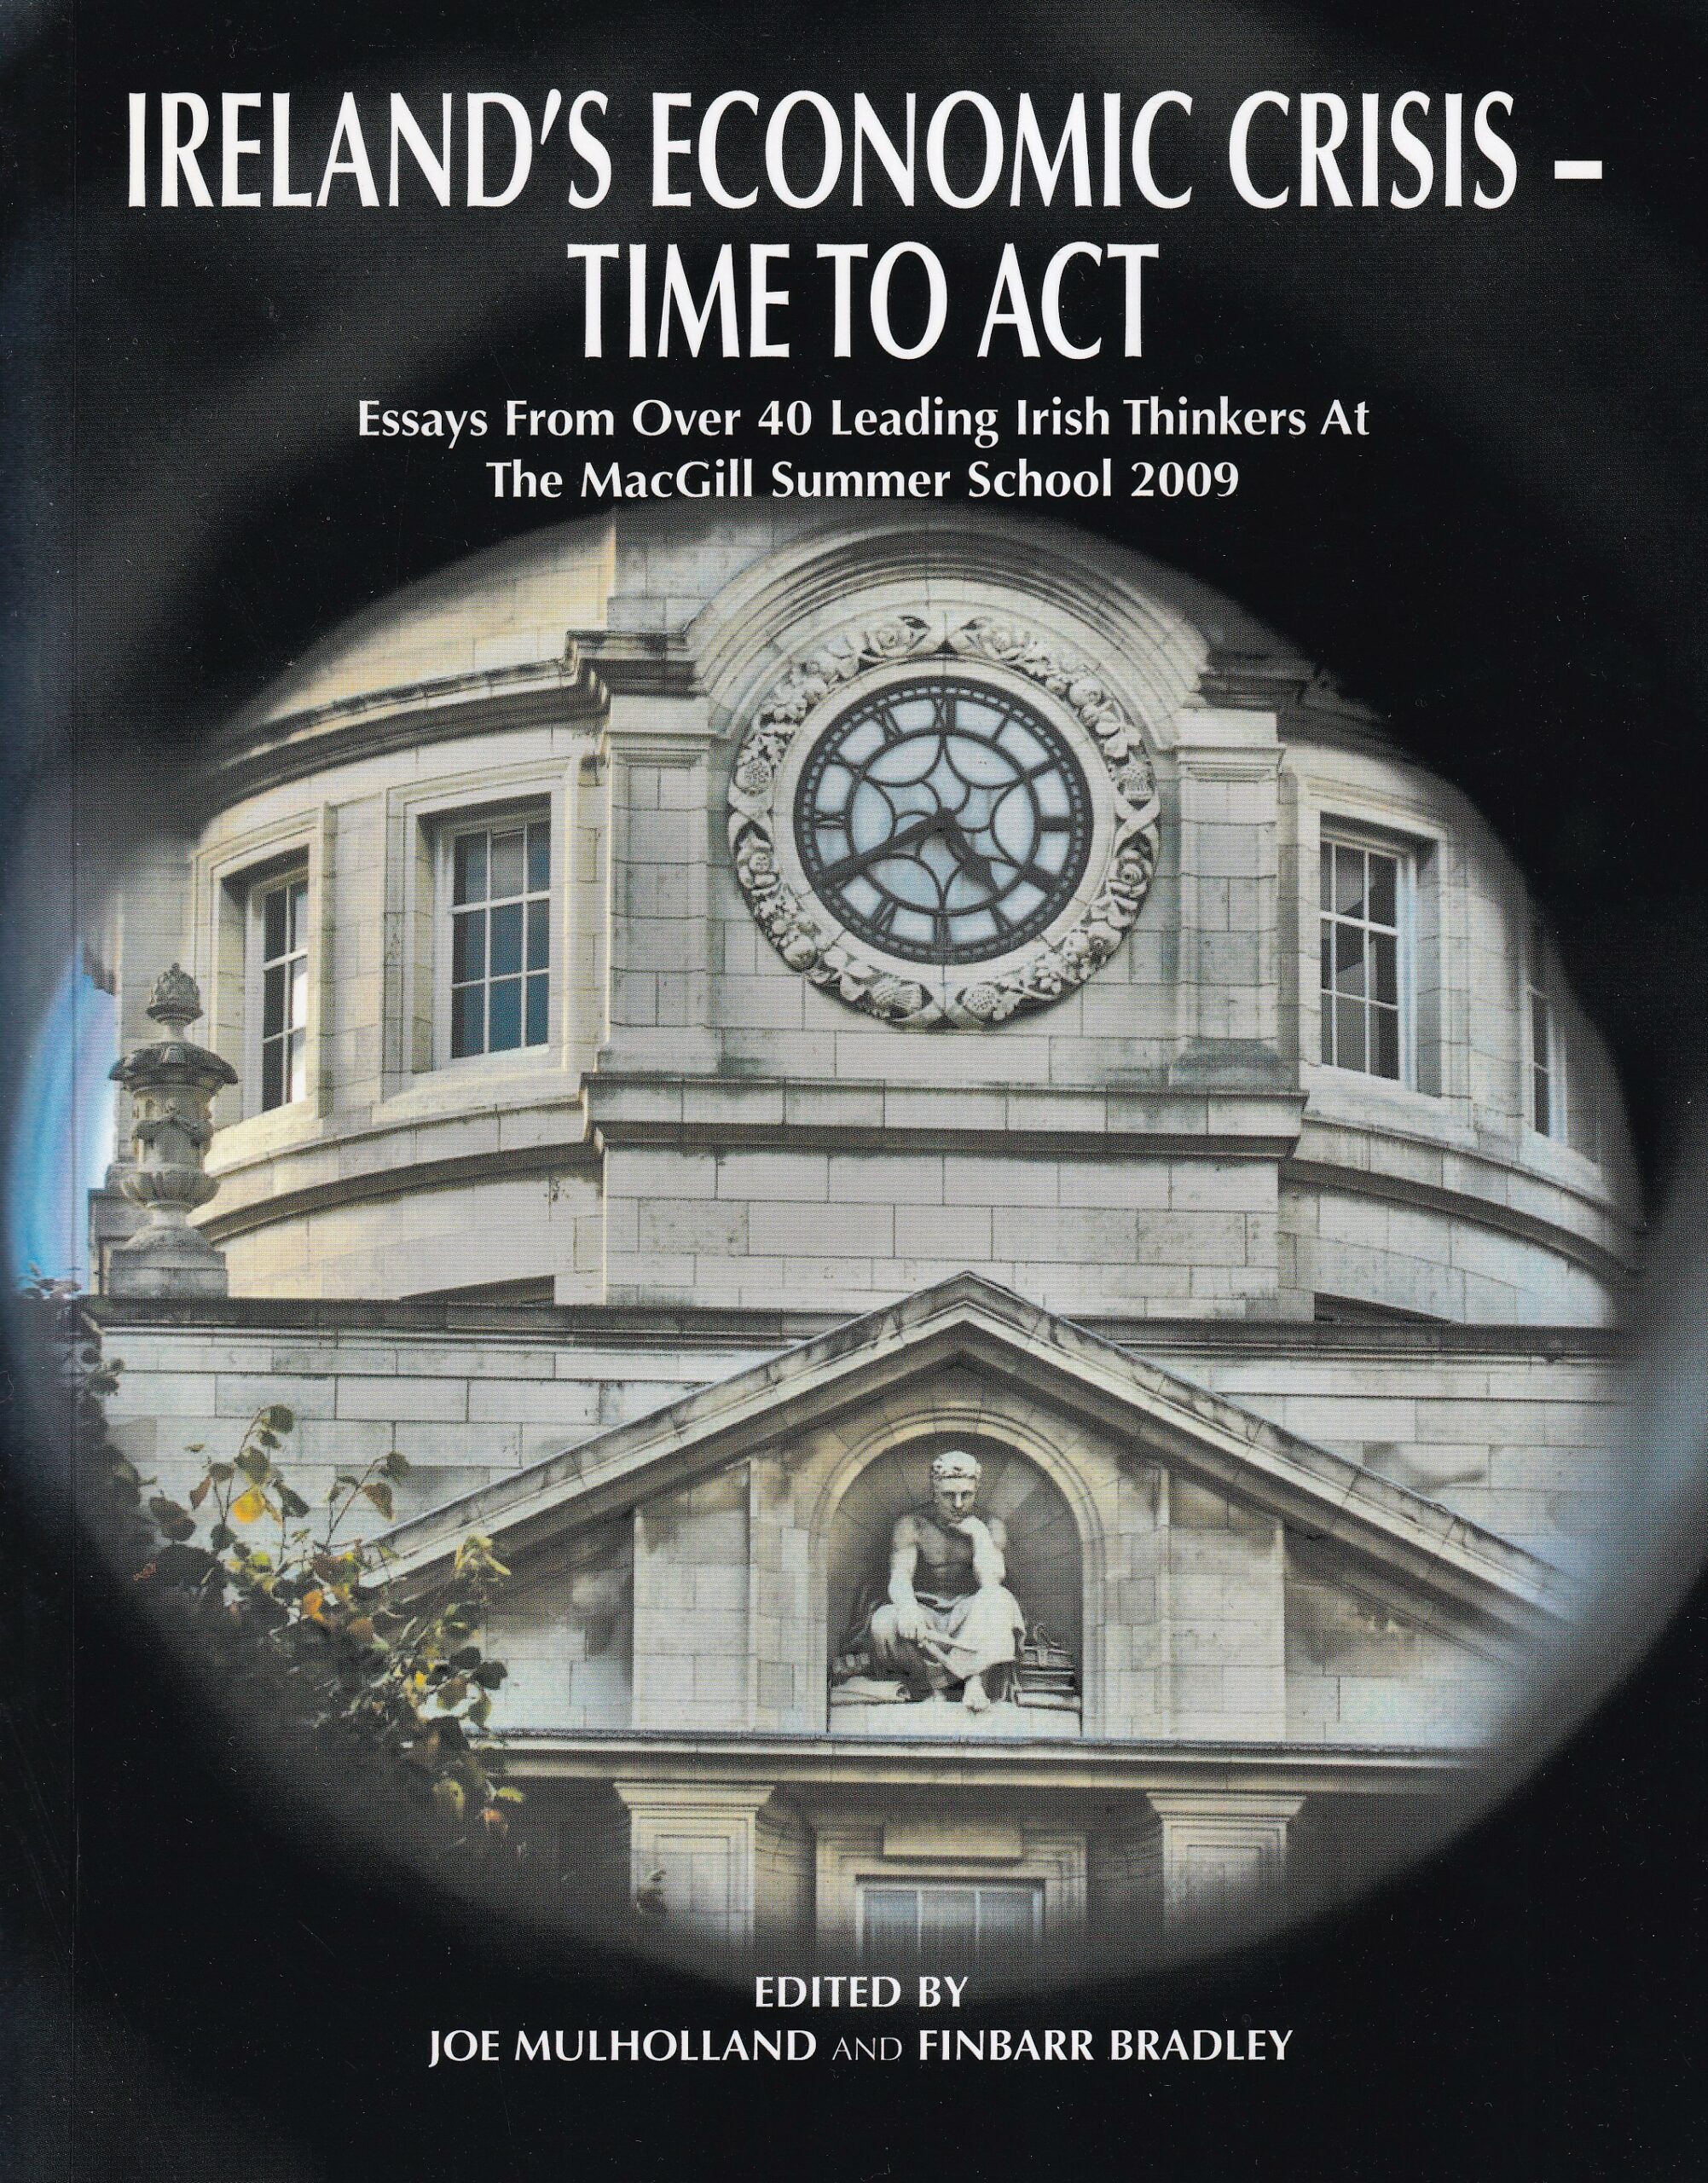 Ireland’s Economic Crisis- Time to Act: Essays from Over 40 Leading Irish Thinkers at the MacGill Summer School 2009 by Joe Mulholland and Finbar Bradley (eds.)